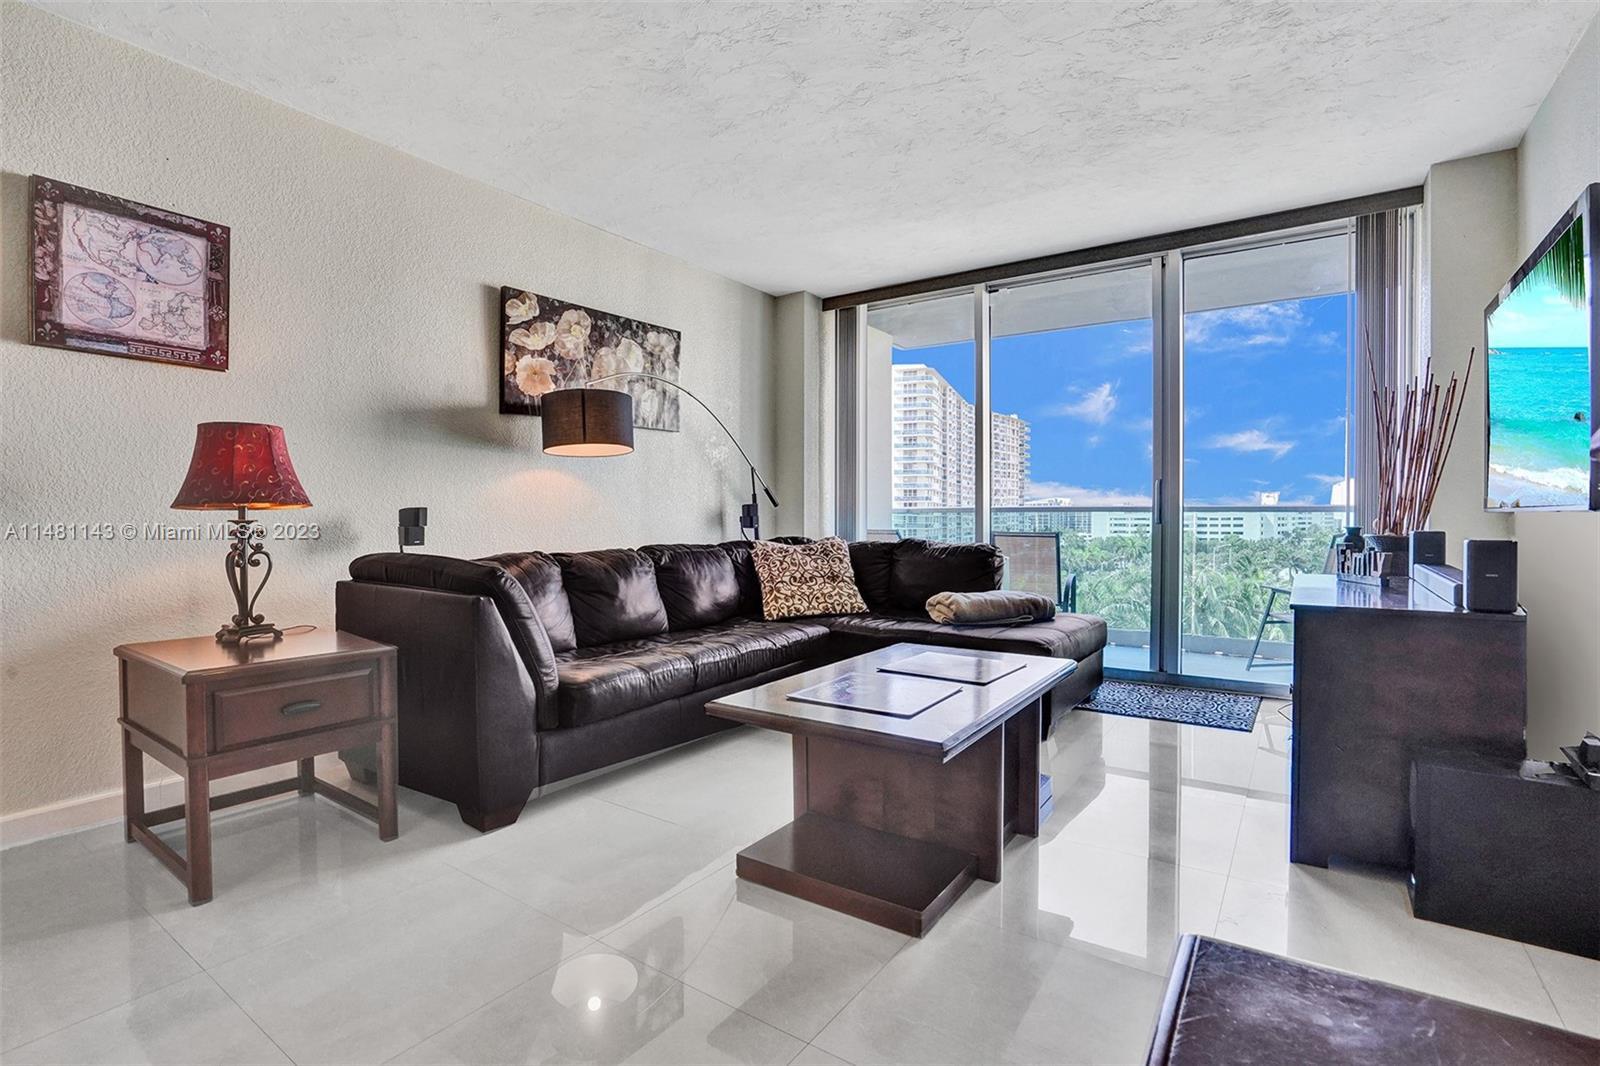 Photo of 4001 S Ocean Dr #7C in Hollywood, FL